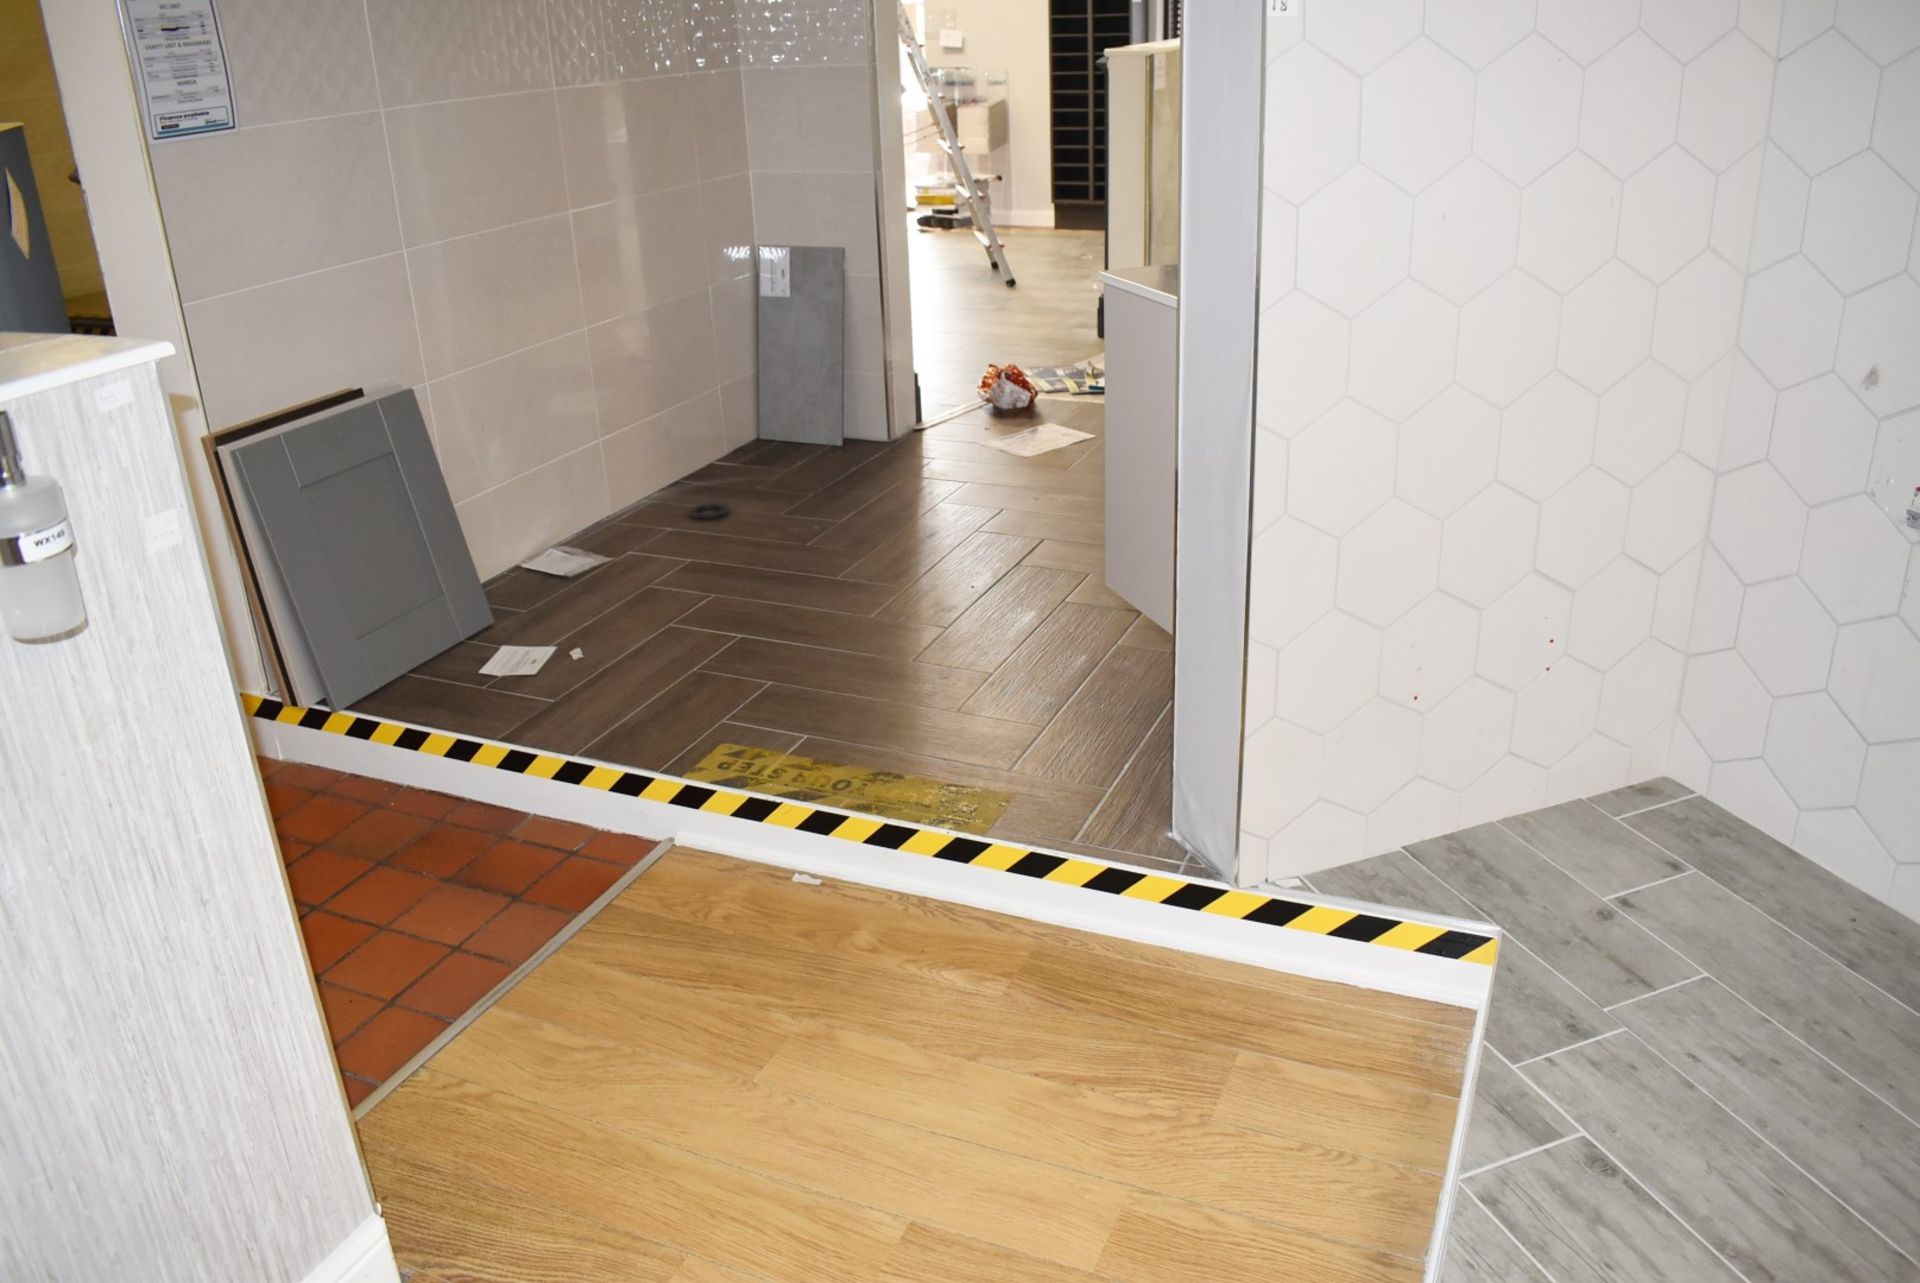 1 x Large Amount of Raised Flooring From a Retail Showroom Environment - Image 13 of 18